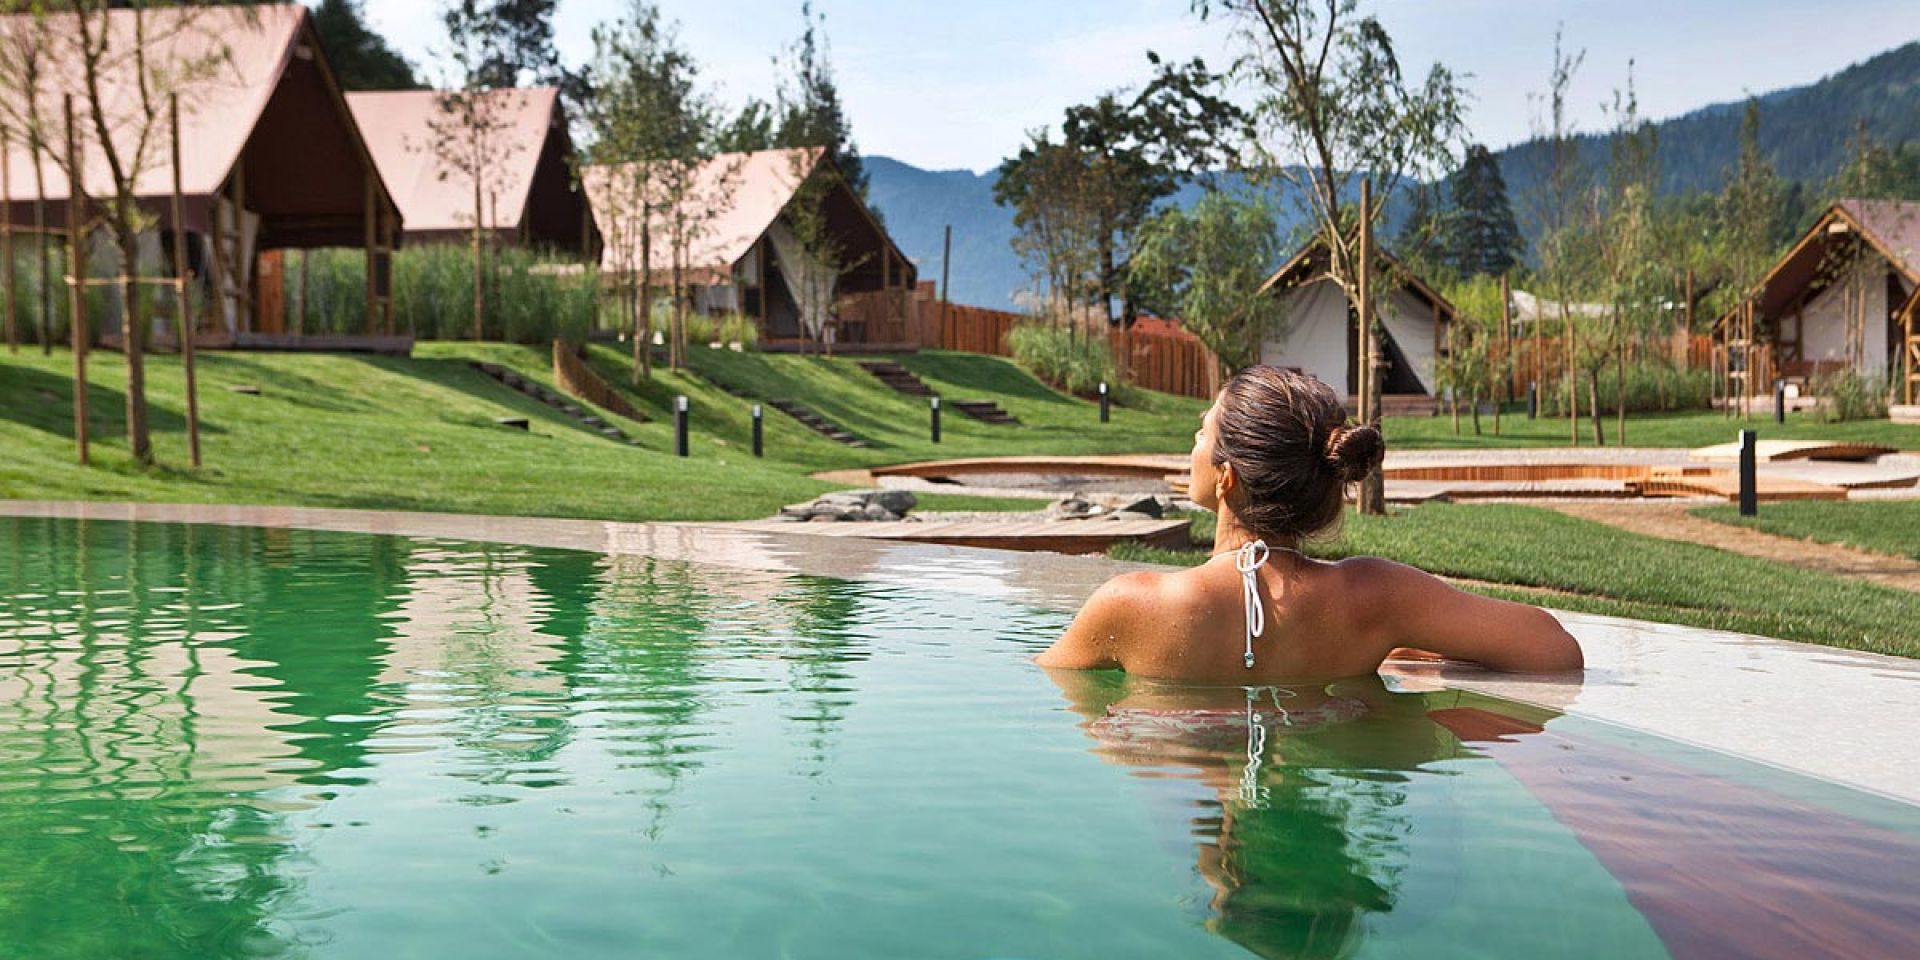 Glamping Sites With Hot Tubs The Very Best Hot Tub Glamping Cool 